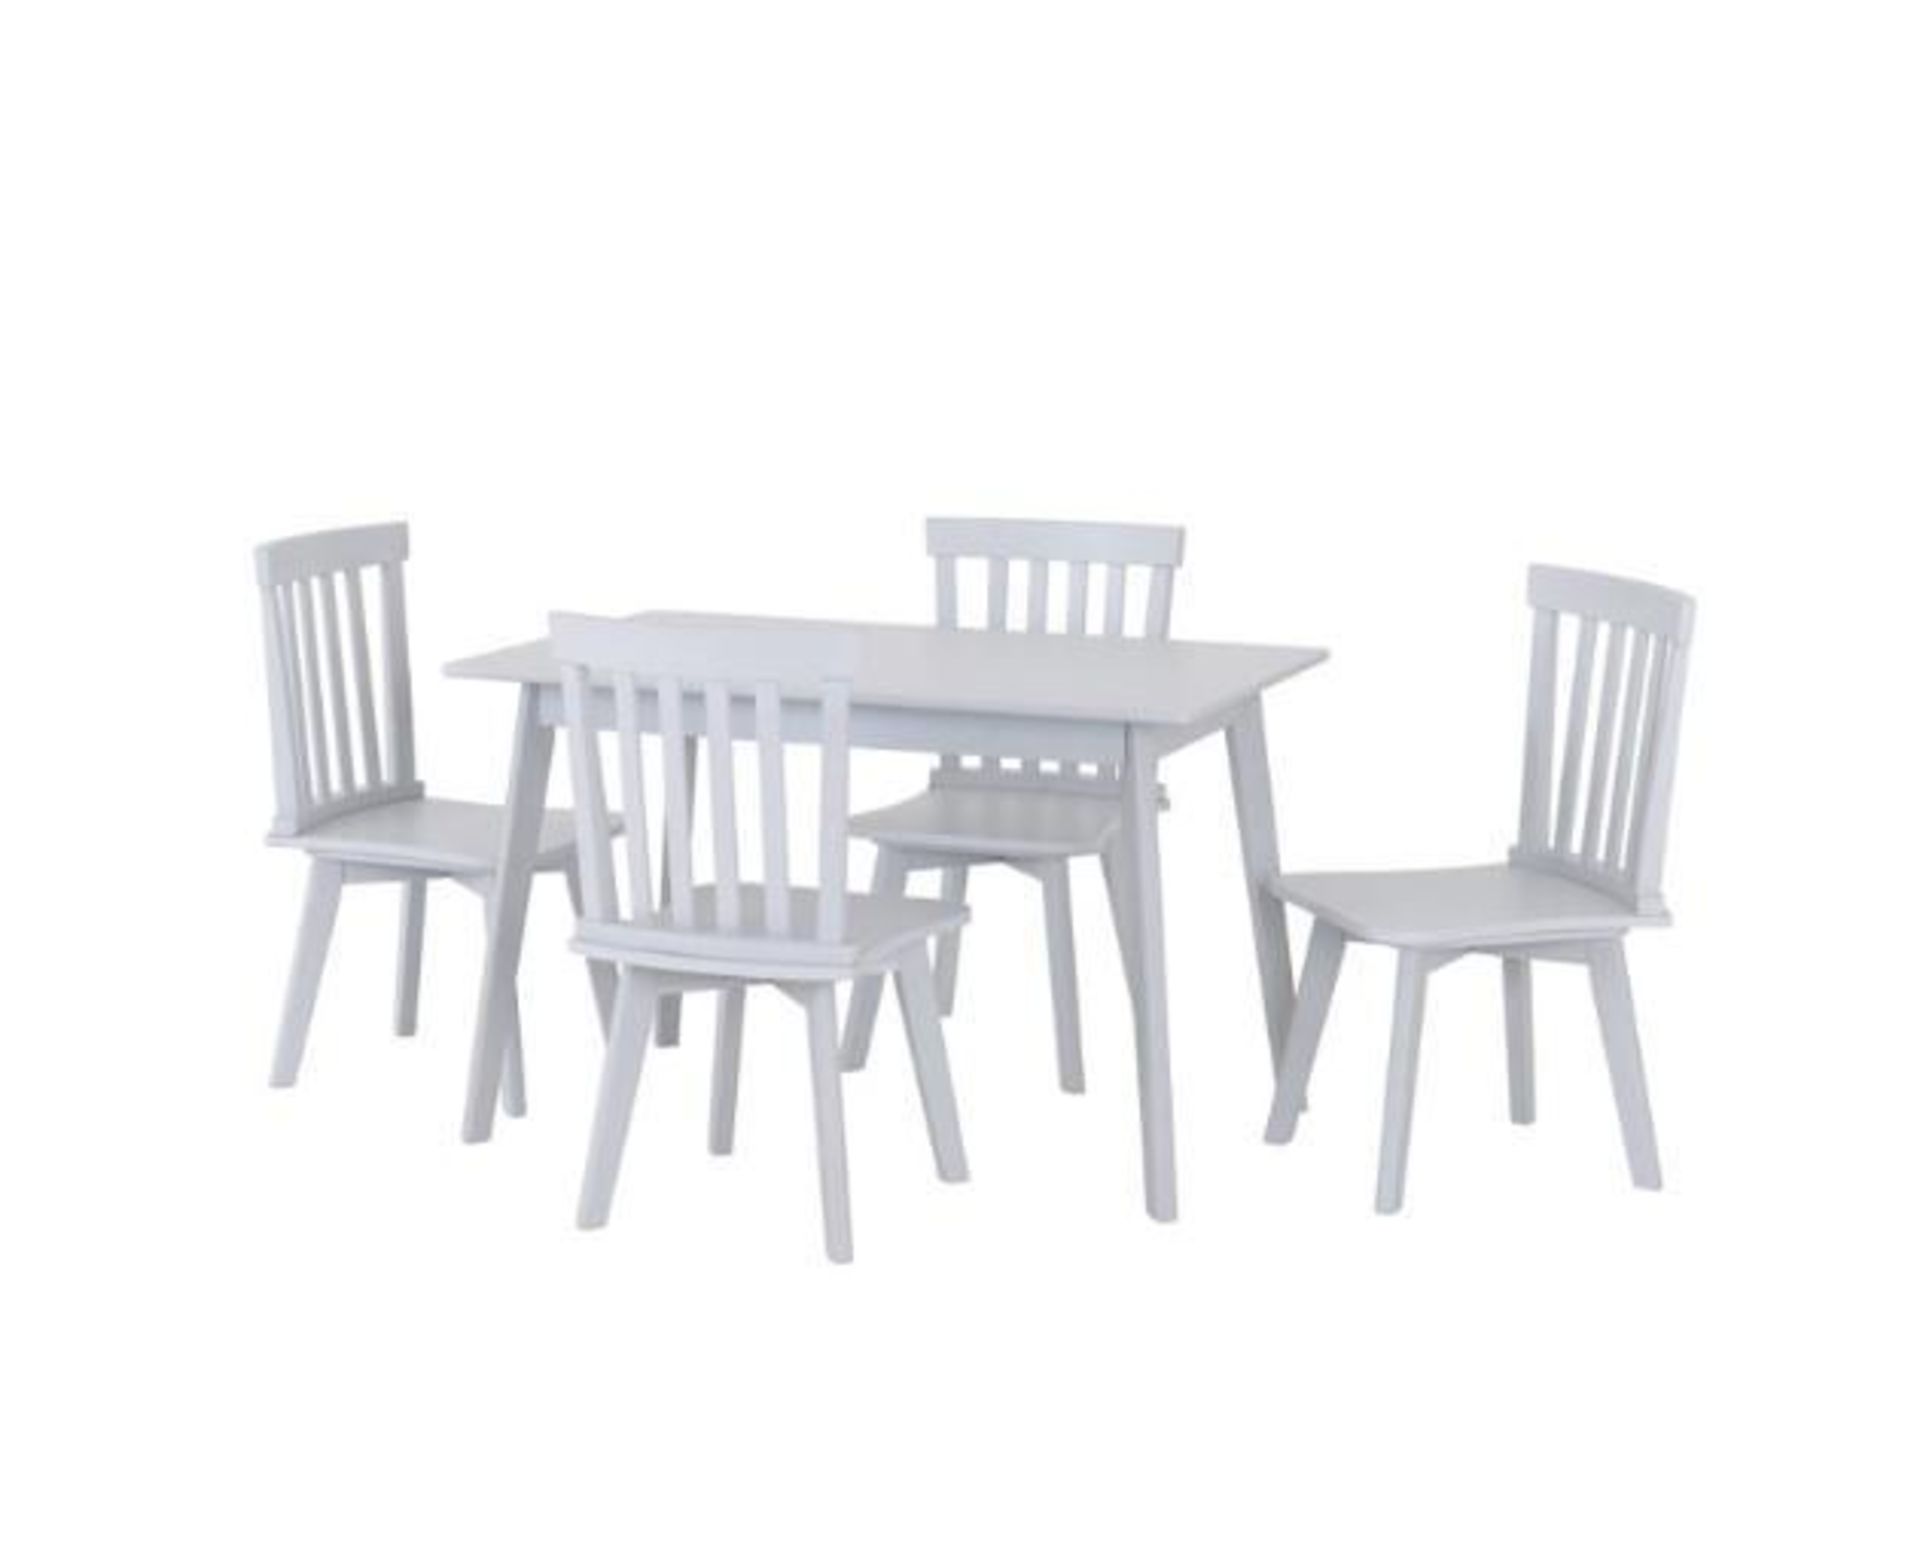 *EX DISPLAY* Matlock grey wooden 4 seater dining set. RRP: £299 - Image 2 of 4